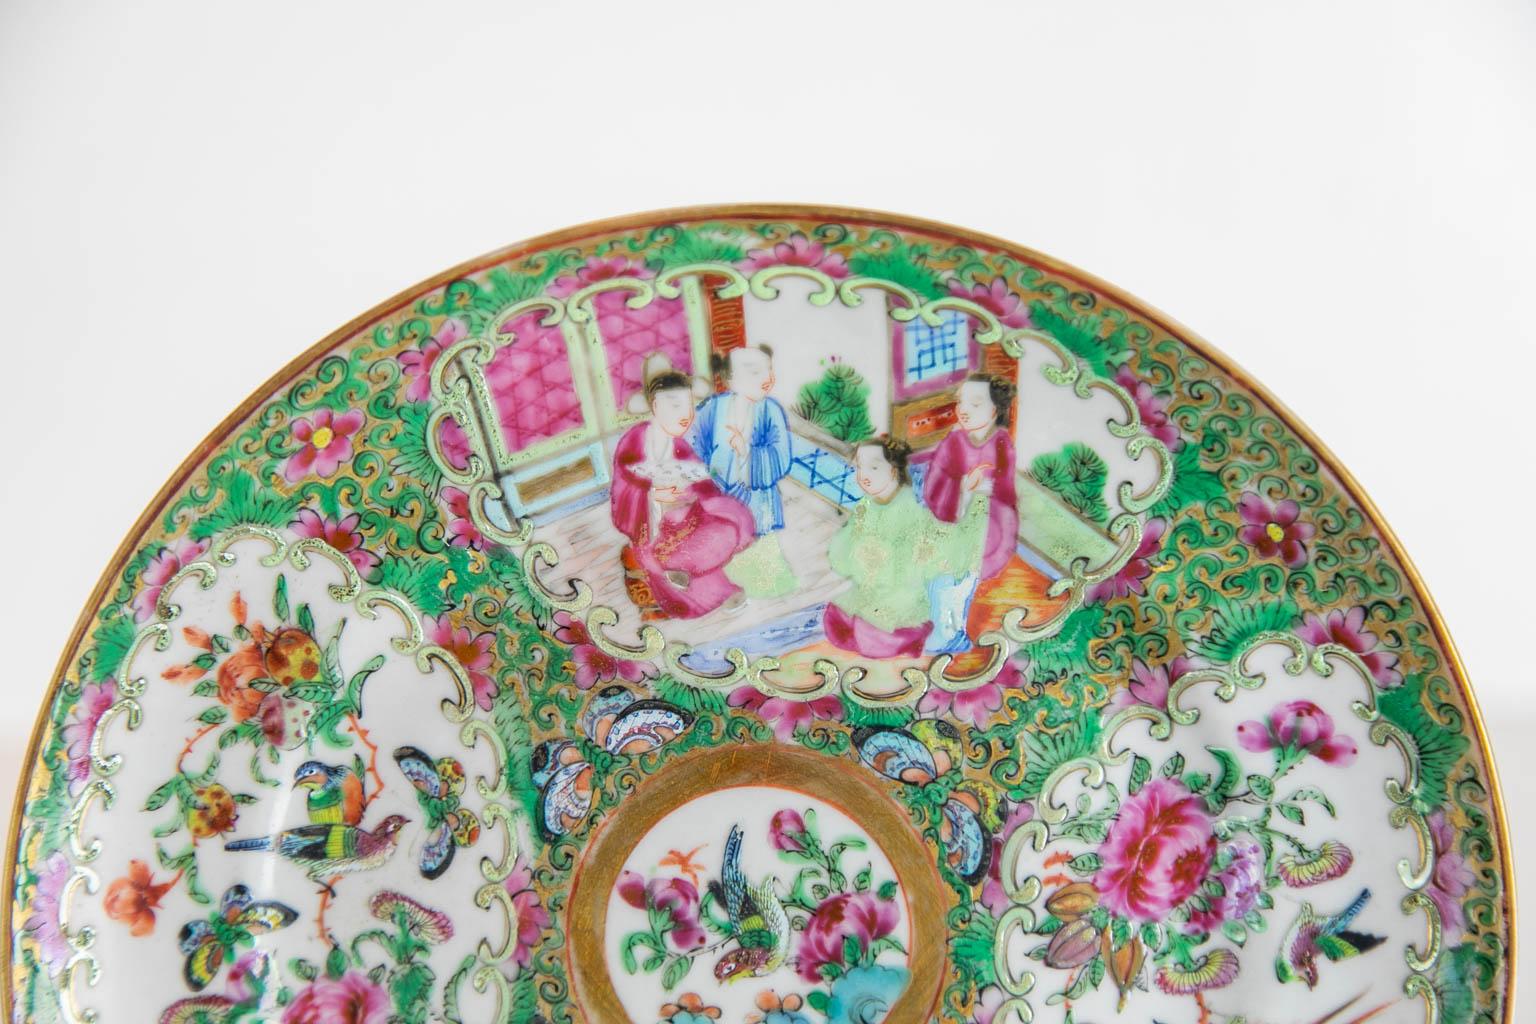 This Chinese plate is in excellent condition. There are four cartouches depicting Mandarin figures, birds, butterflies, fruit, and flowers.